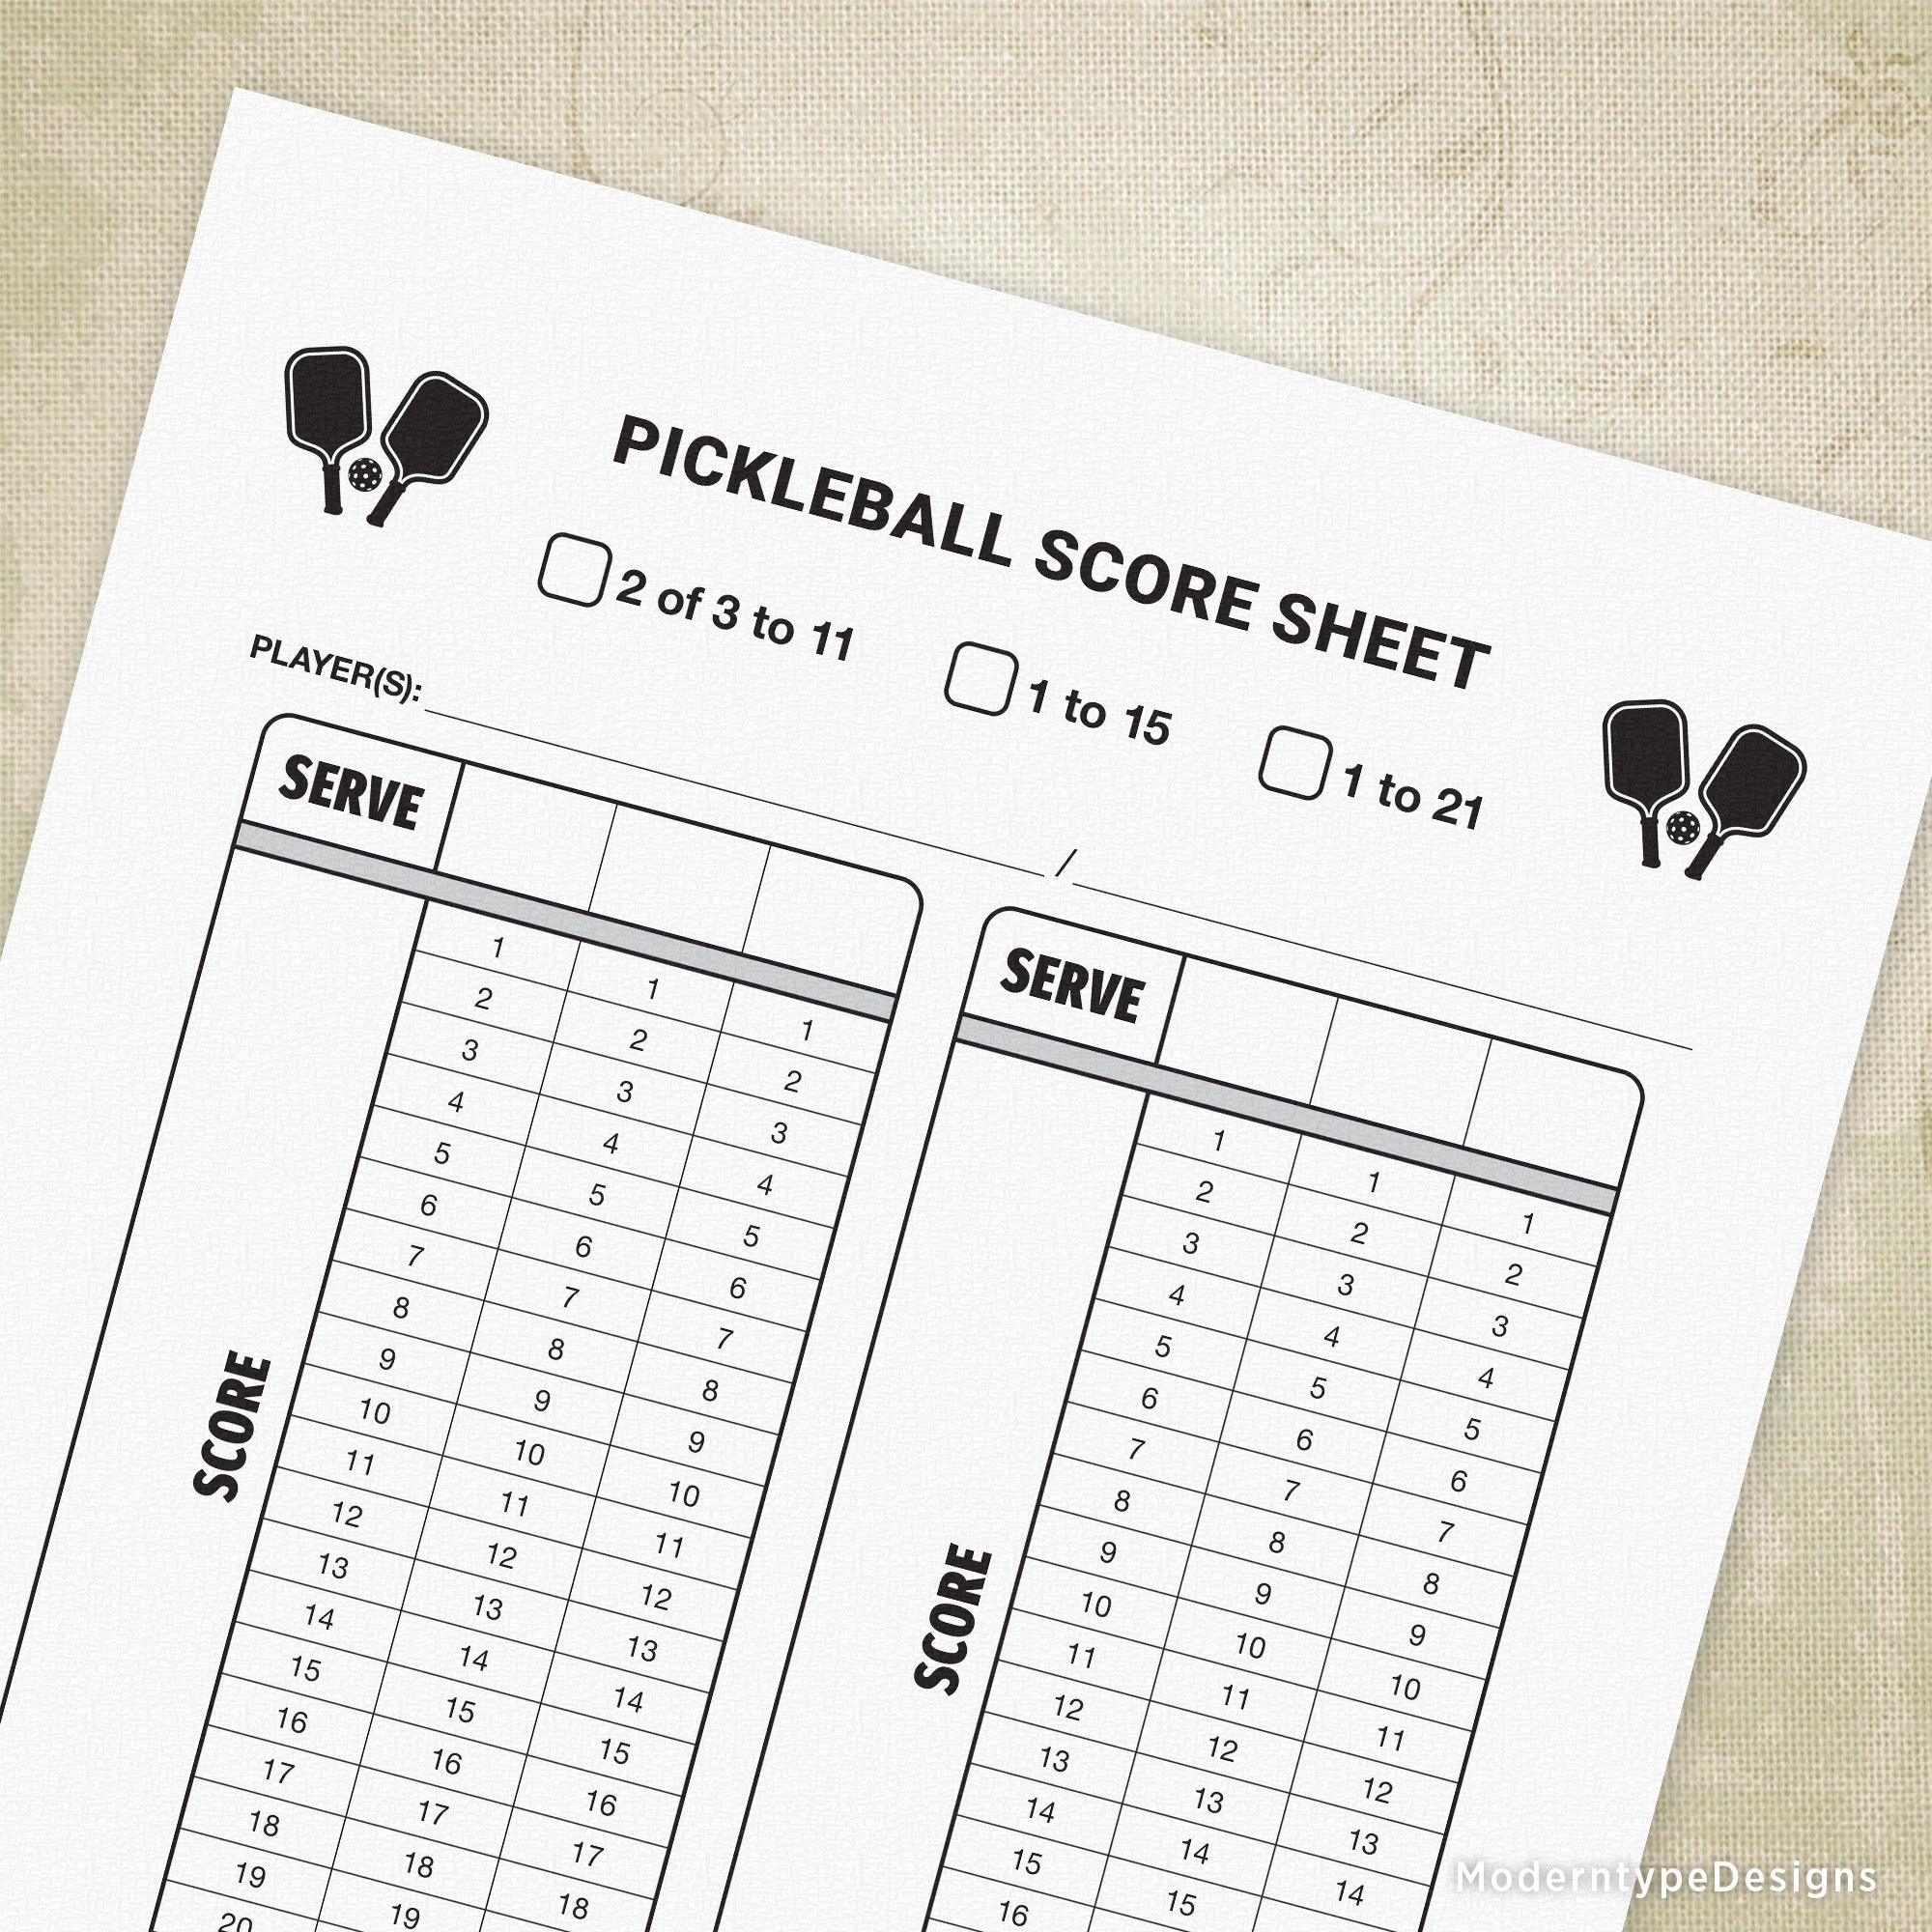 How to Score in Pickleball